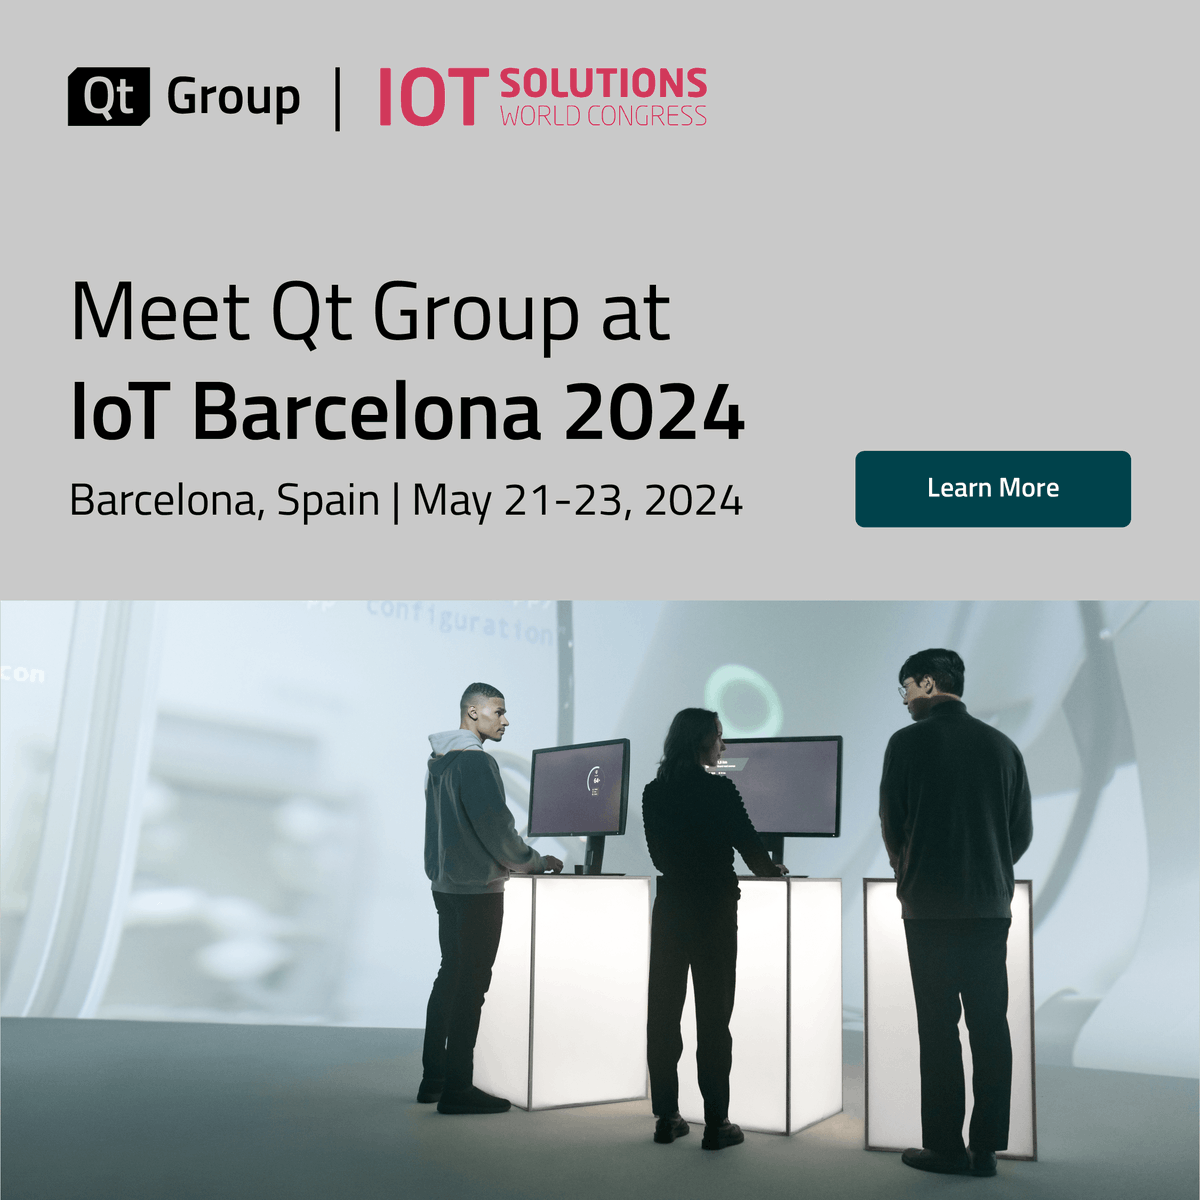 Are you going to @IOTSWC Barcelona 2024, May 21st-23rd? Visit us at the @ST_World Ecosystem booth, where you can speak with our experts and view our latest demos.

Learn more and register here: hubs.li/Q02vw1kG0

#STAuthorizedPartner #STPartnerProgram #QtDev #IoTSWC24 #IoT